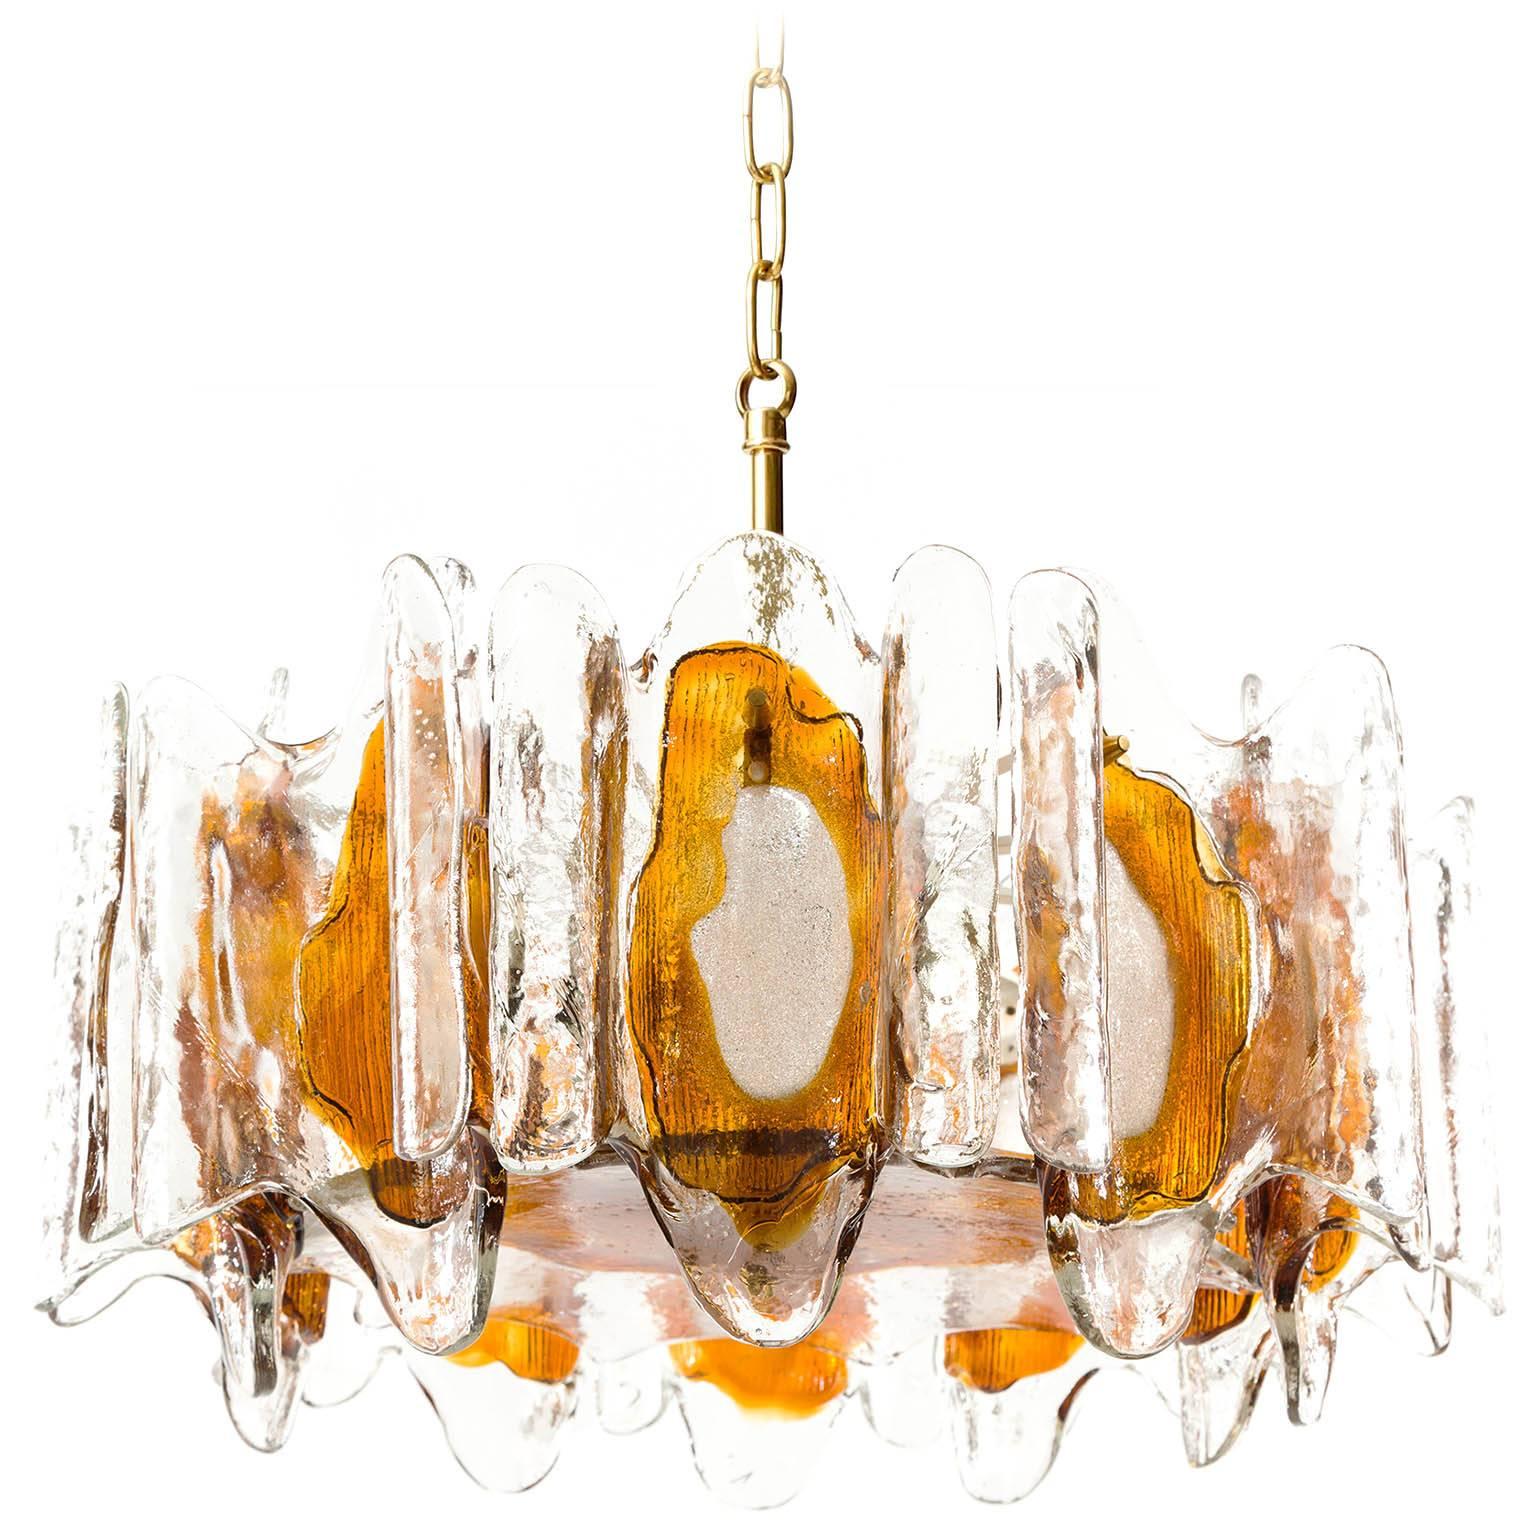 A beautiful pendant chandelier made of melted orange / amber tone Murano glass by Kalmar, manufactured in midcentury, circa 1970 (late 1960s or early 1970s).
The light fixture has five sockets for small screw base bulbs or LEDs.
The lights can be